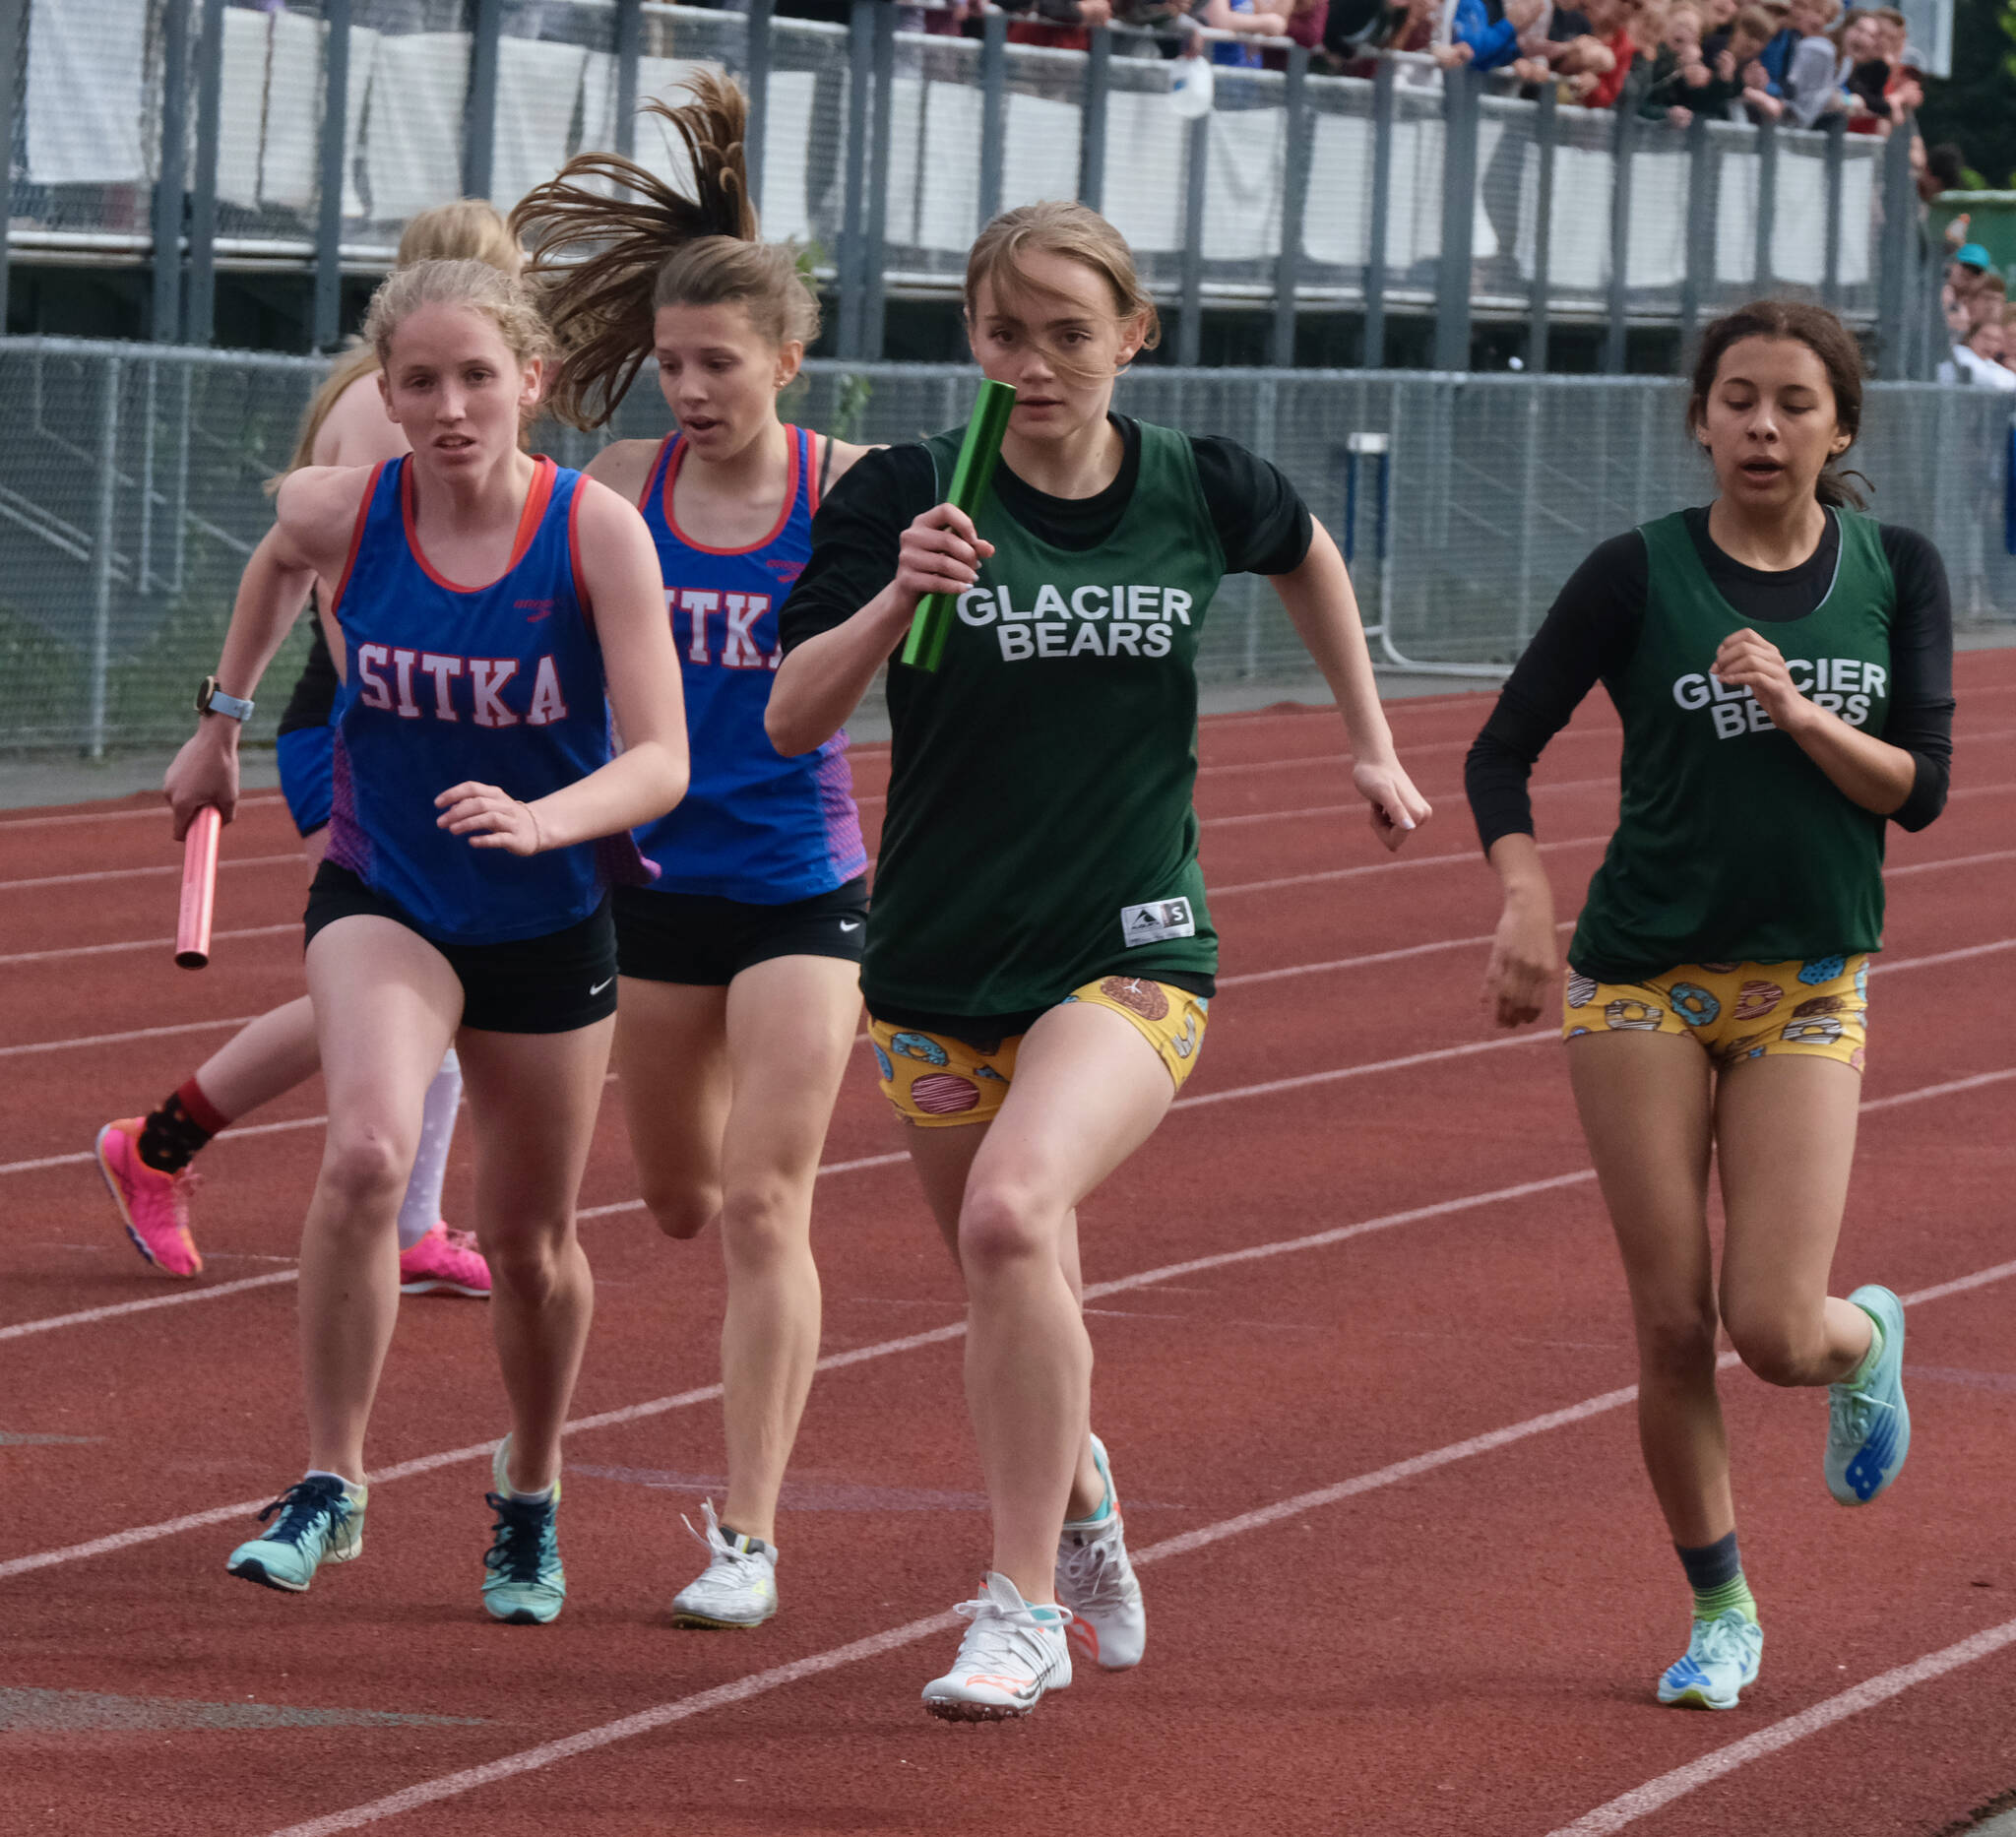 Klas Stolpe / Juneau Empire
Sitka sophomore Clare Mullin and Haines senior Avari Getchell start the anchor leg of the Division II girls 4x400 relay after taking baton passes from Sitka freshman Natalie Hall and Haines sophomore Ari’el Godinez Long during the Region V Track & Field Championships, Saturday at Thunder Mountain High School.